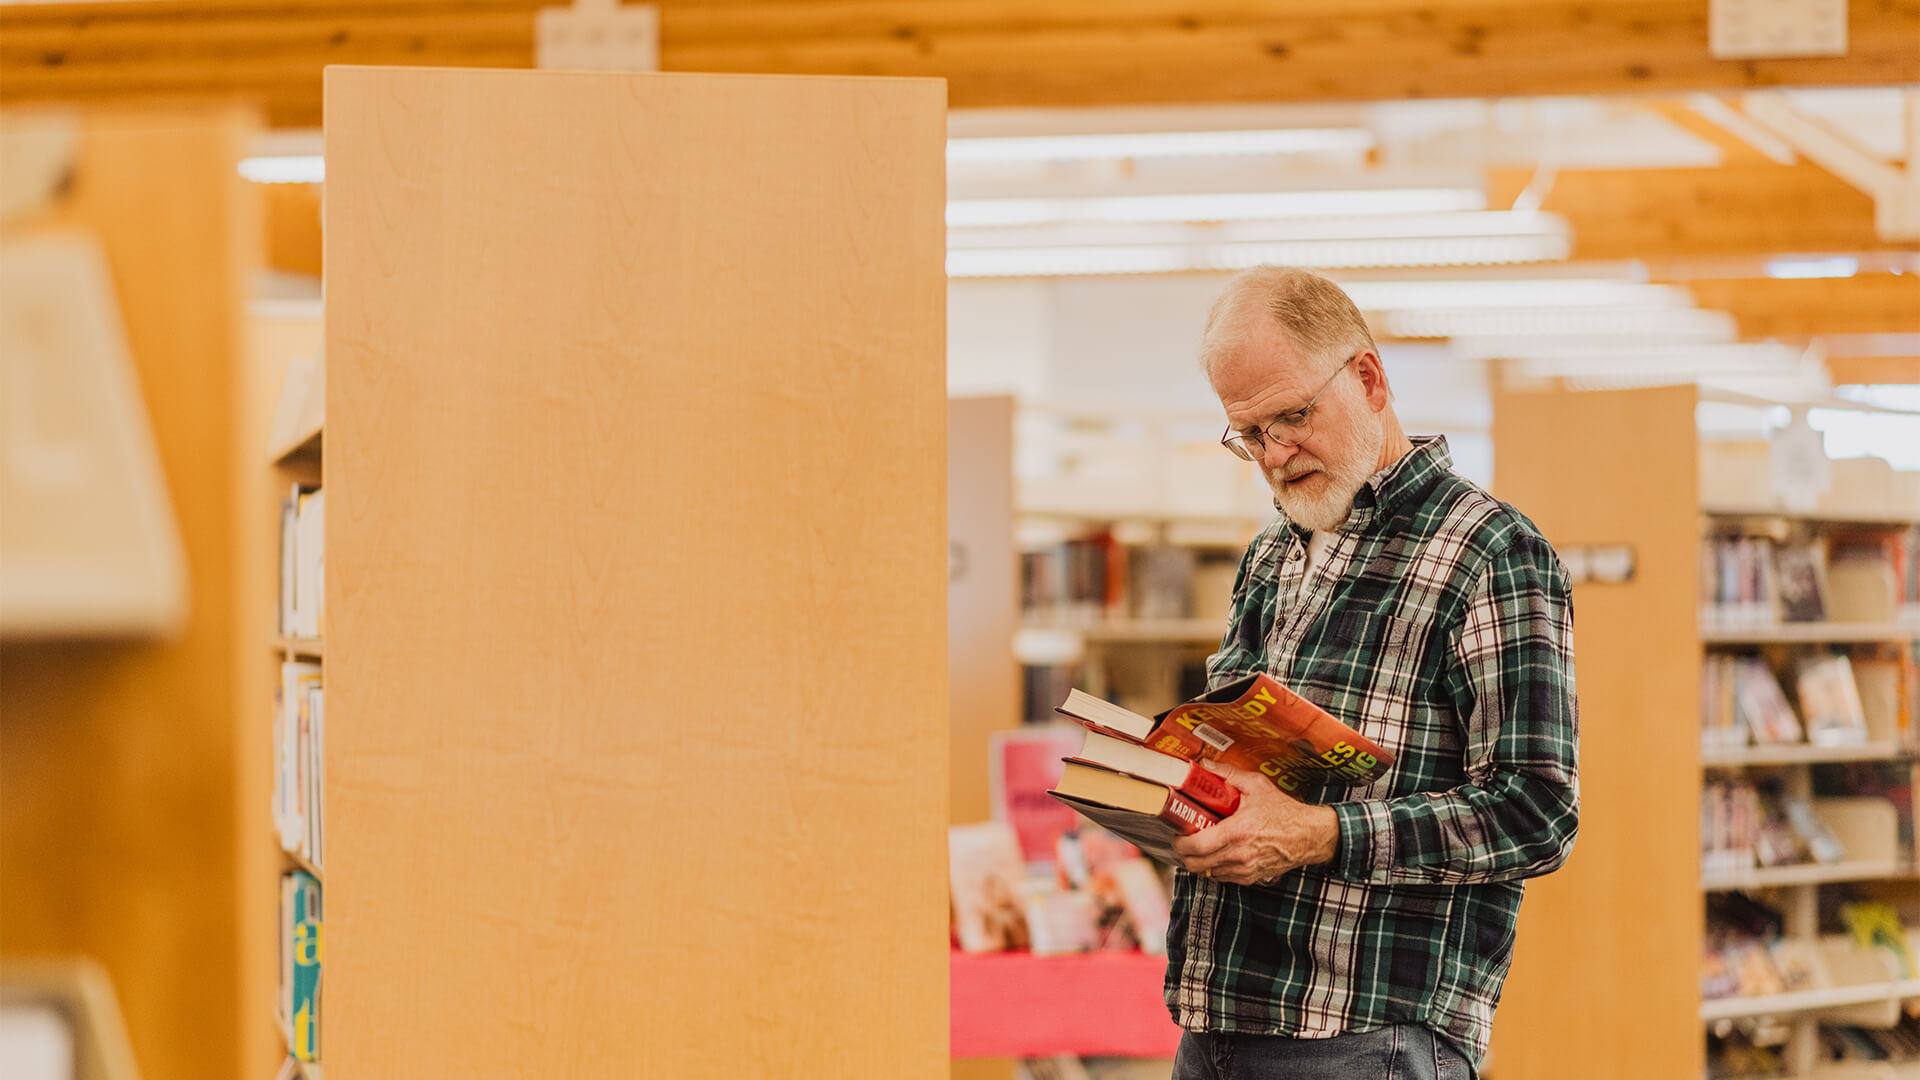 Man in library browsing shelves and holding books